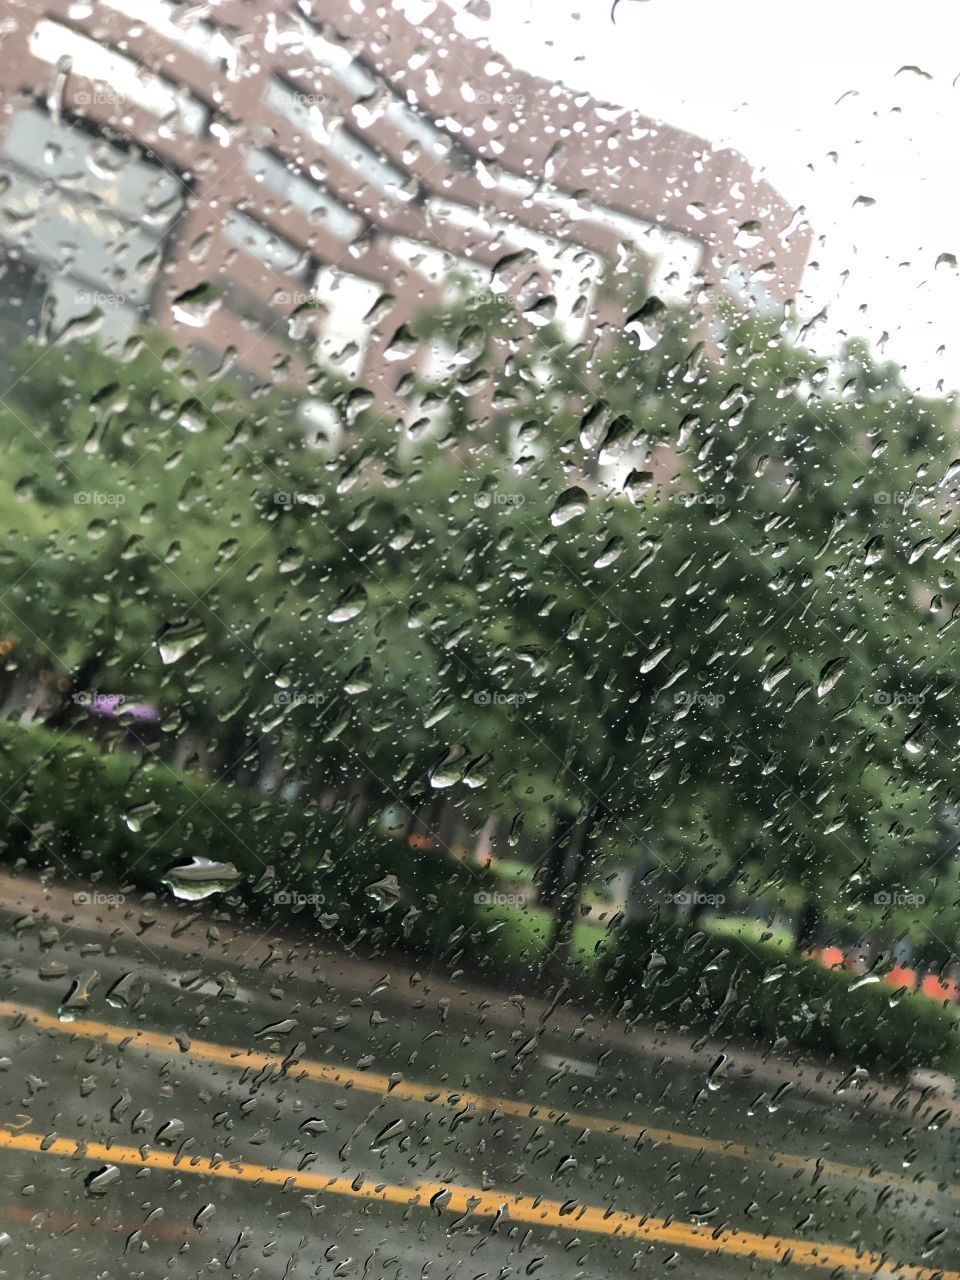 Just driving around, taking a beautiful picture of the rain